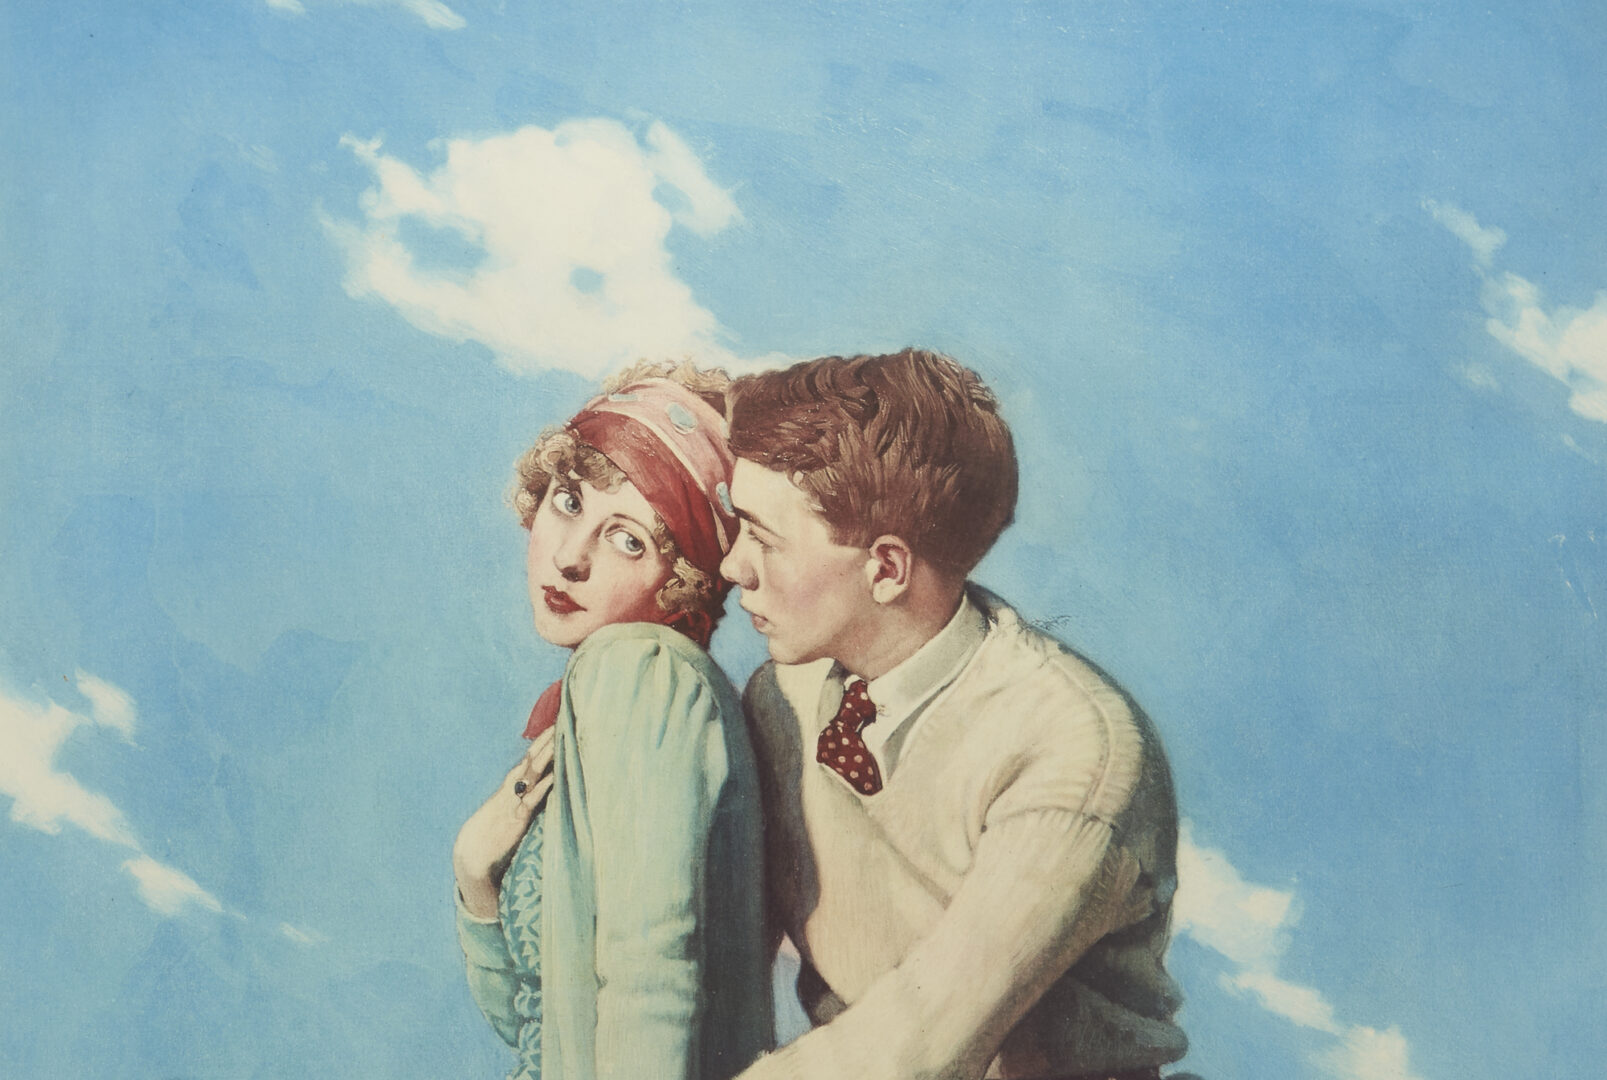 Lot 341: Norman Rockwell Signed Lithograph, Top of the World, 1928 Ladies' Home Journal Cover